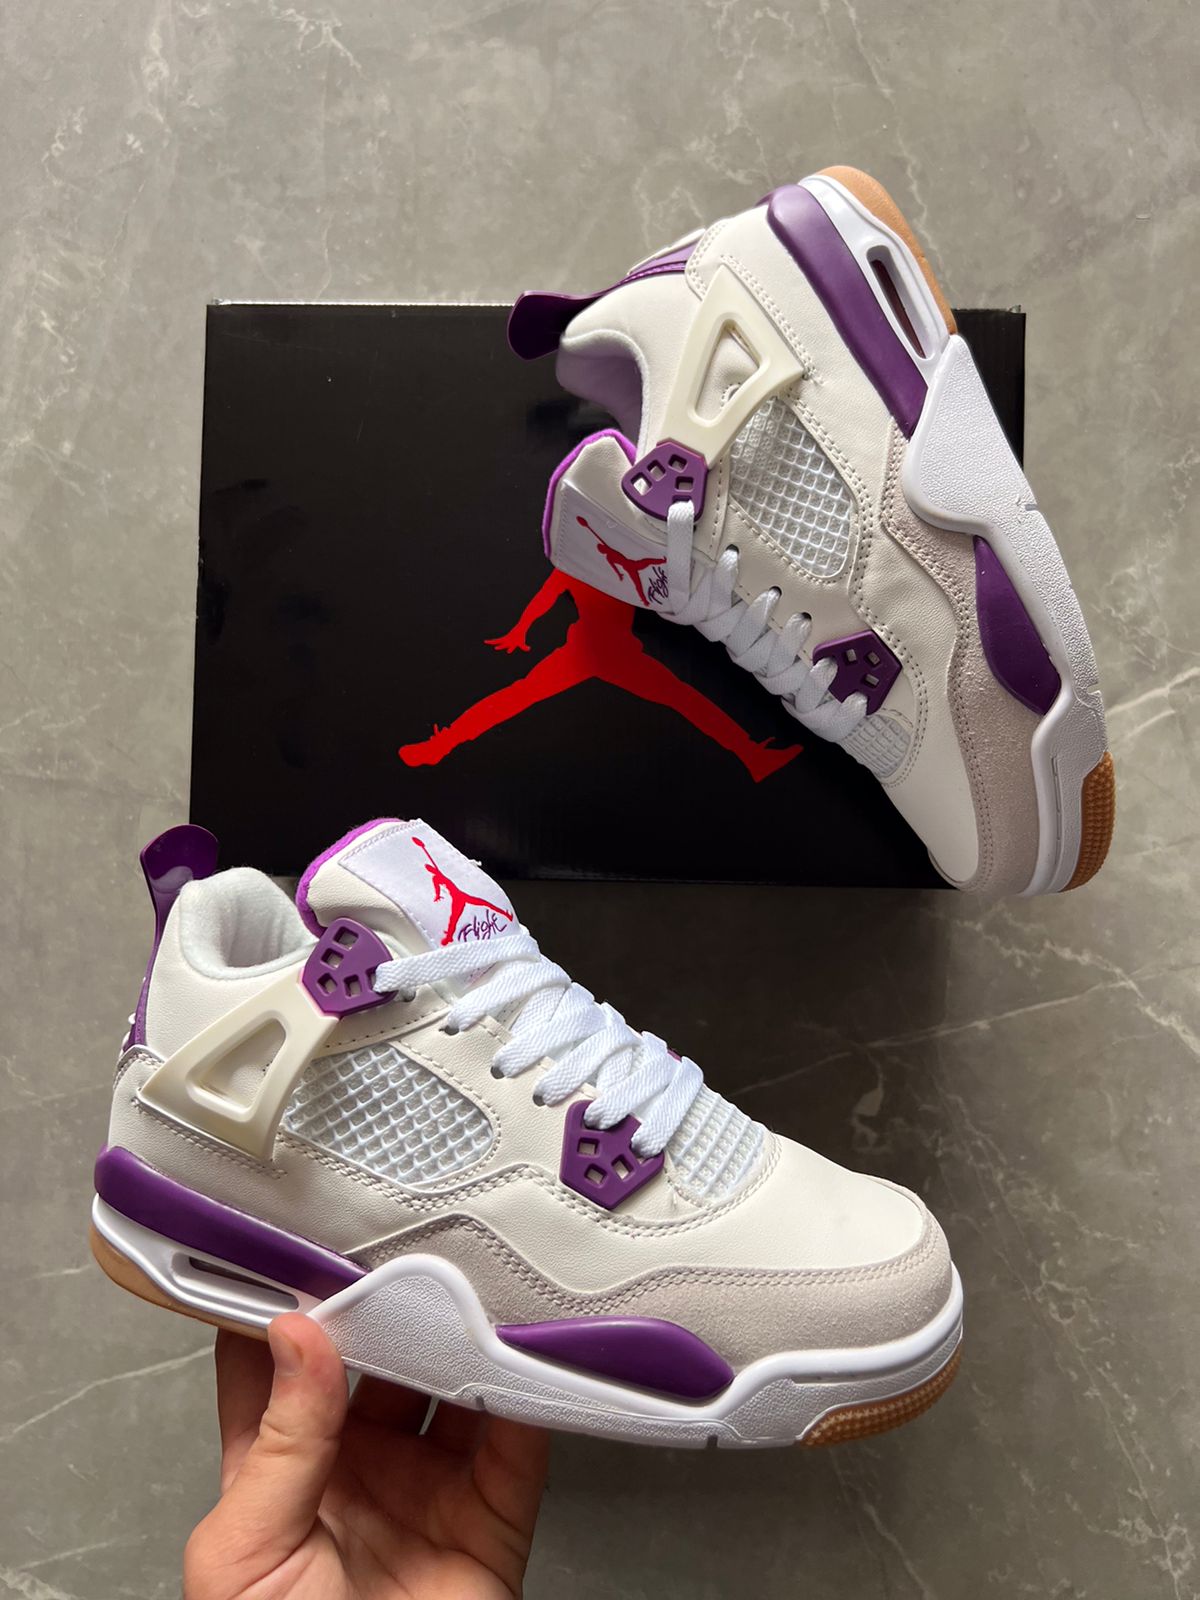 Retro Four Purple Sneakers For Girls